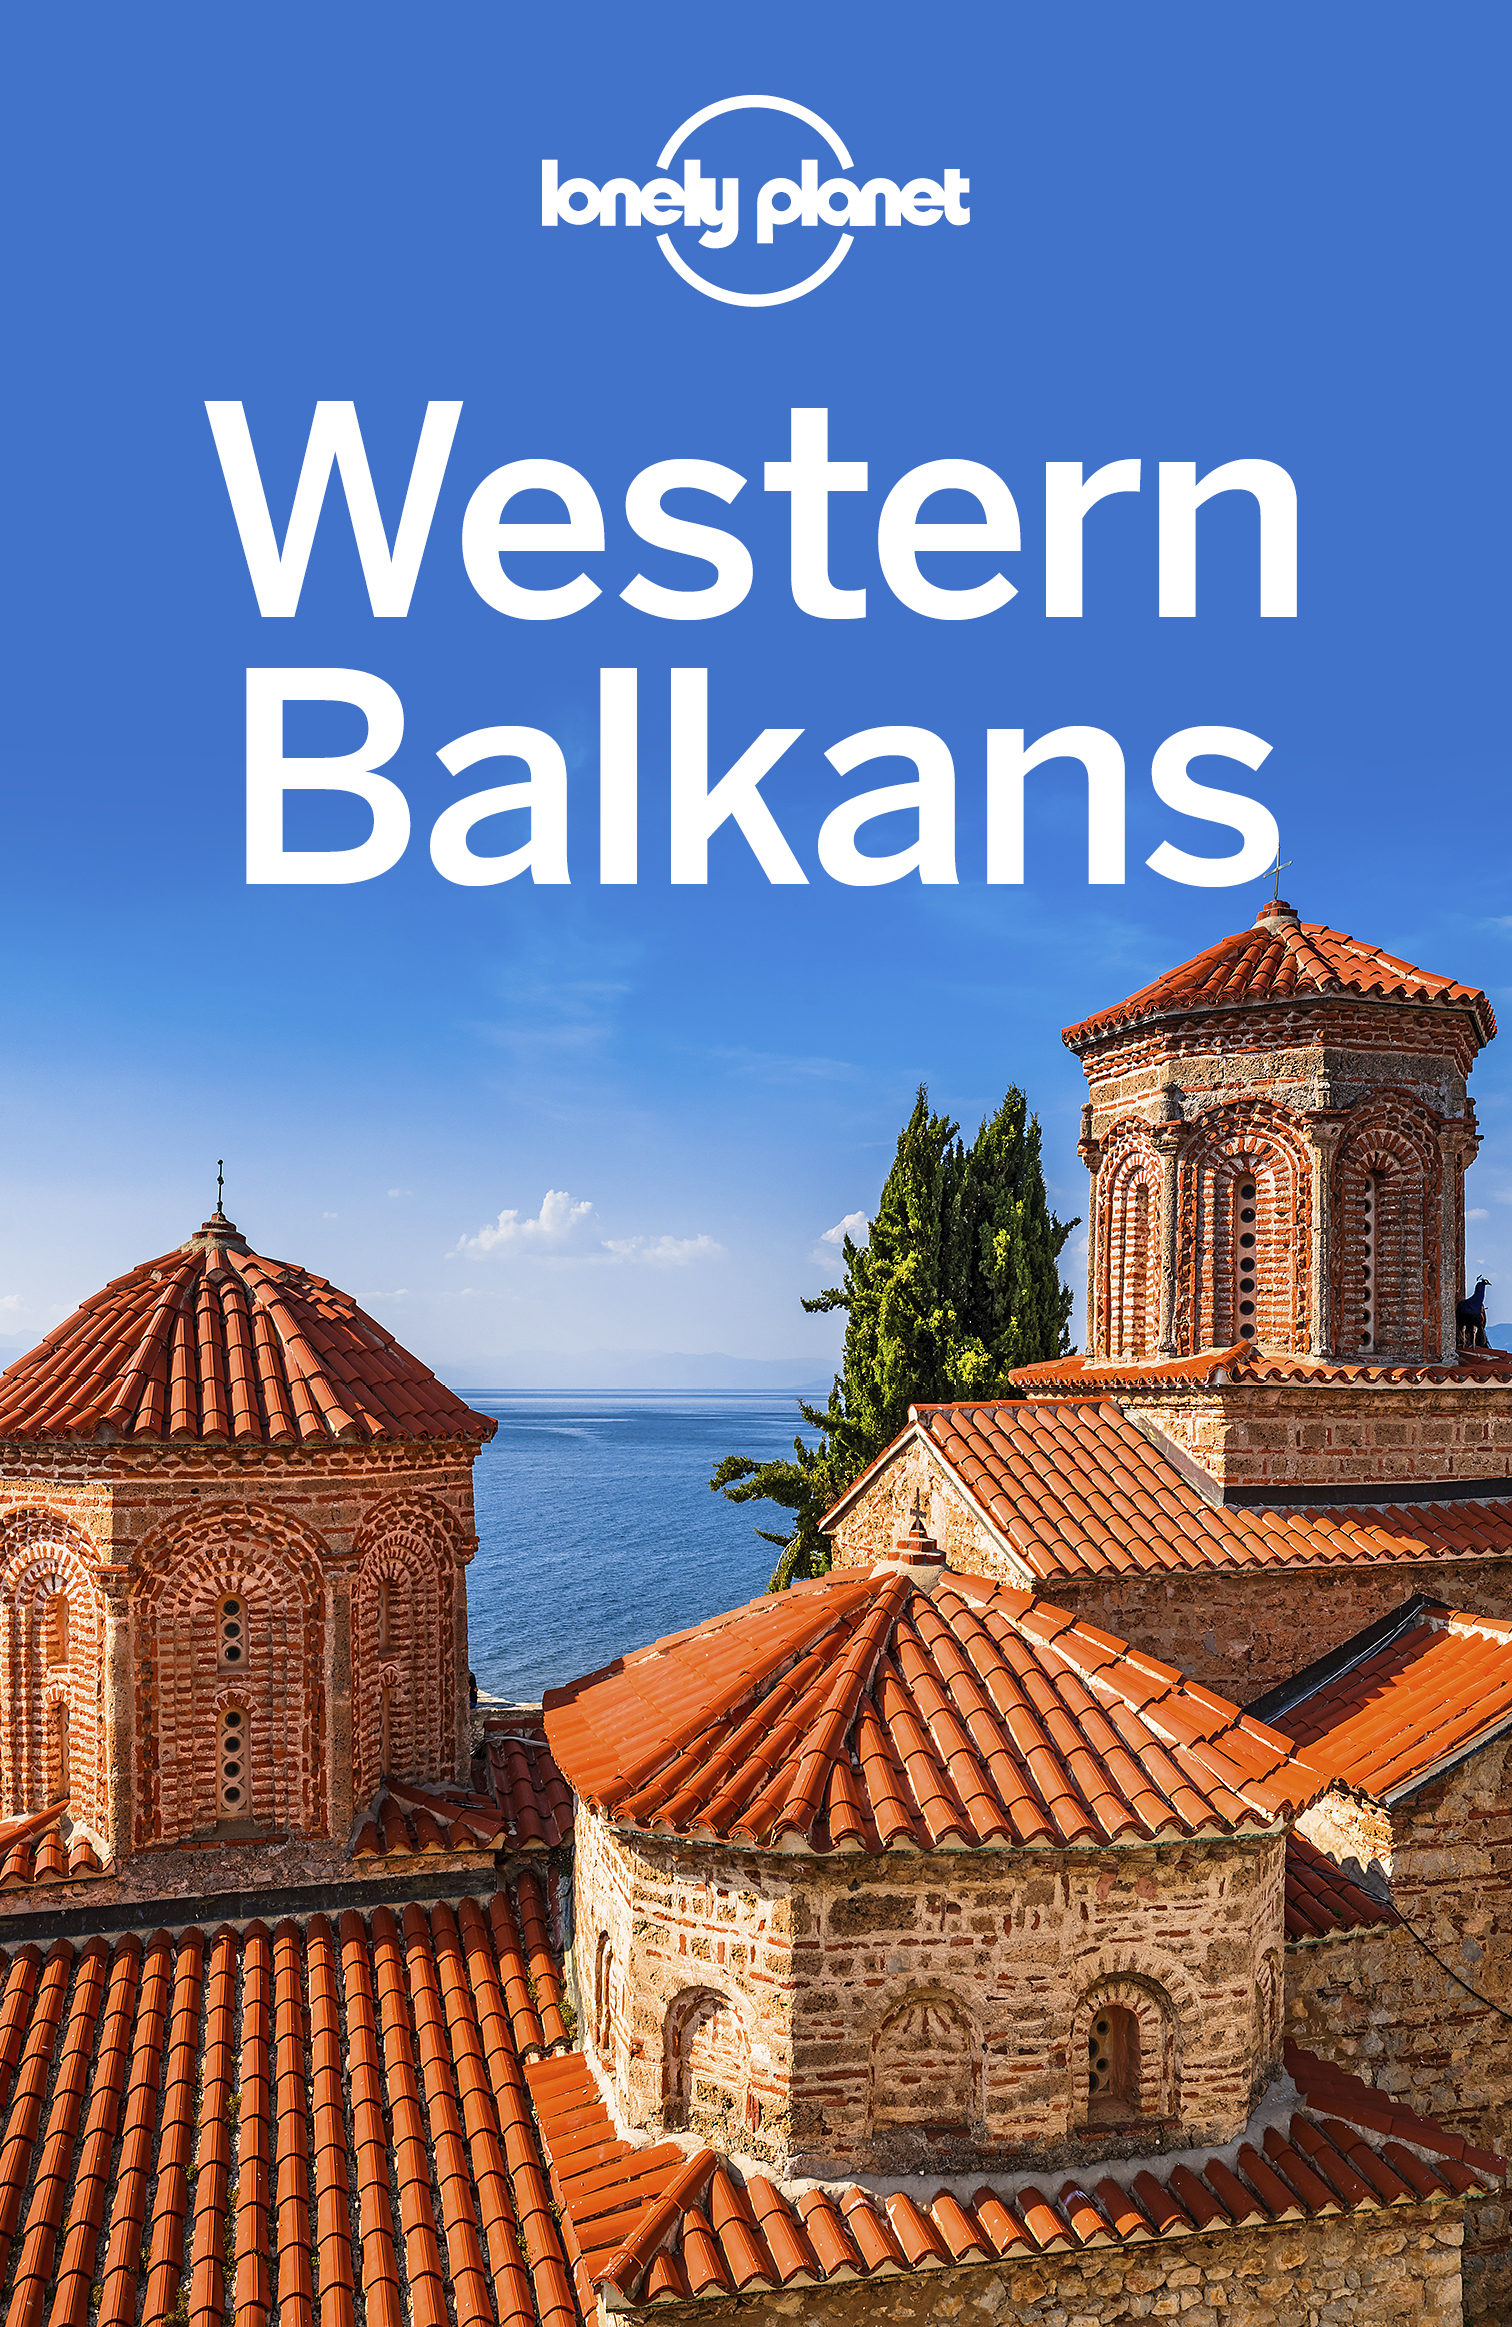 Lonely Planet Western Balkans - image 1